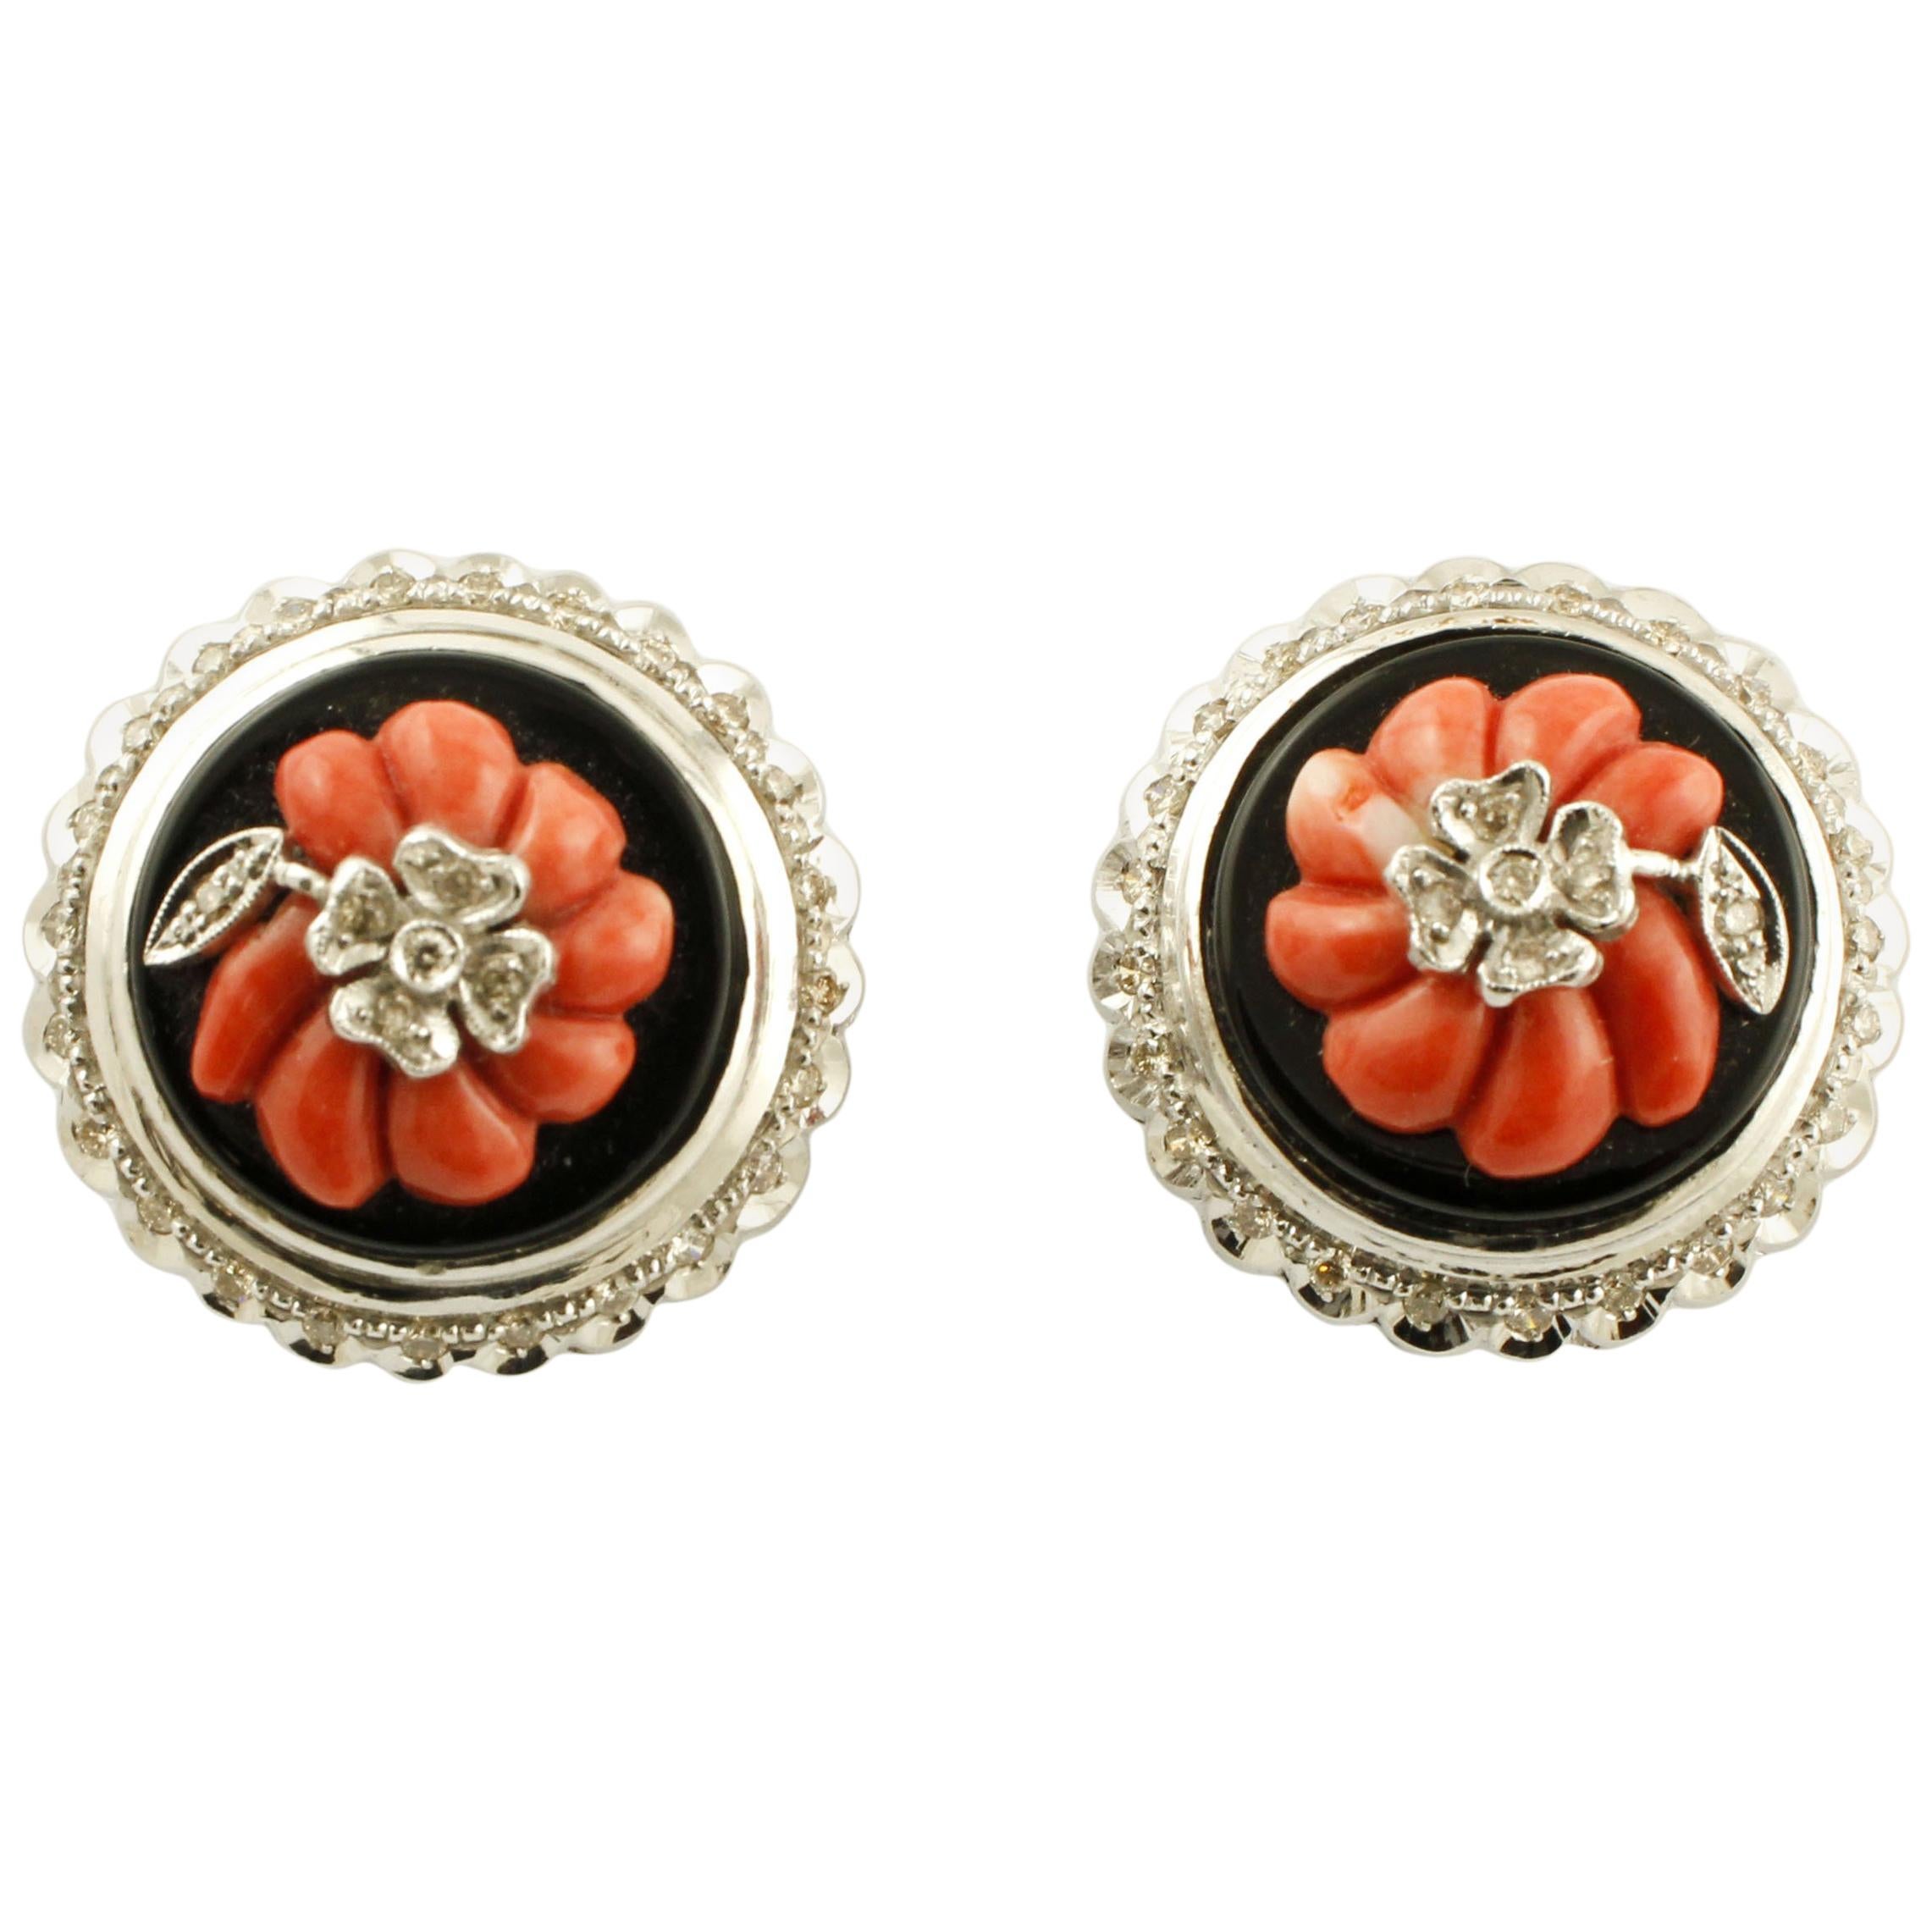 Red Coral Flowers, Onyx , White Diamonds, 14 Karat White Gold  Earrings. For Sale